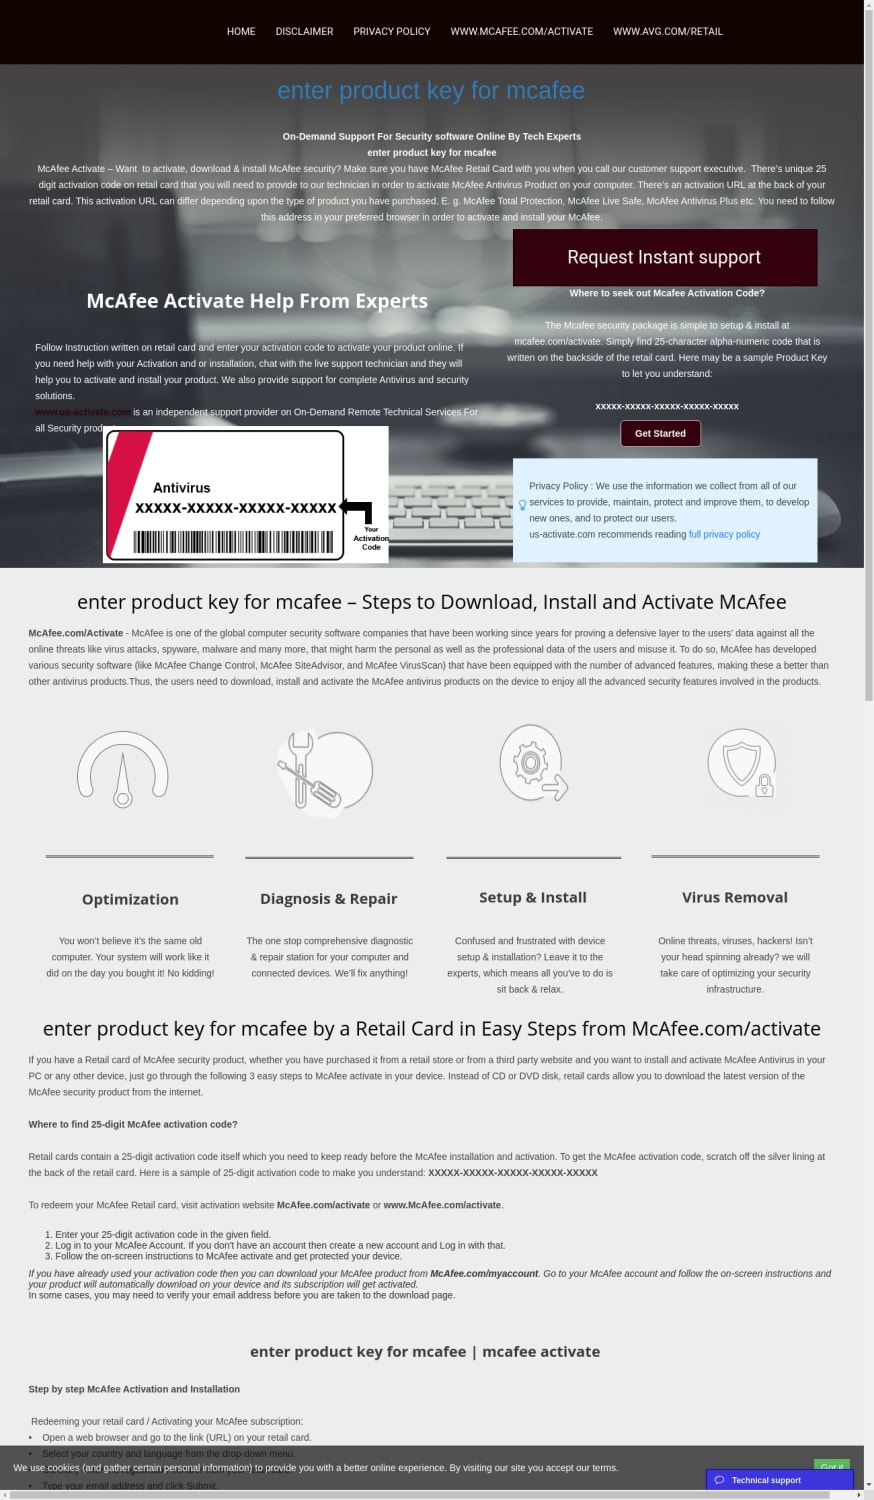 enter product key for mcafee (25 digit mcafee activation code)